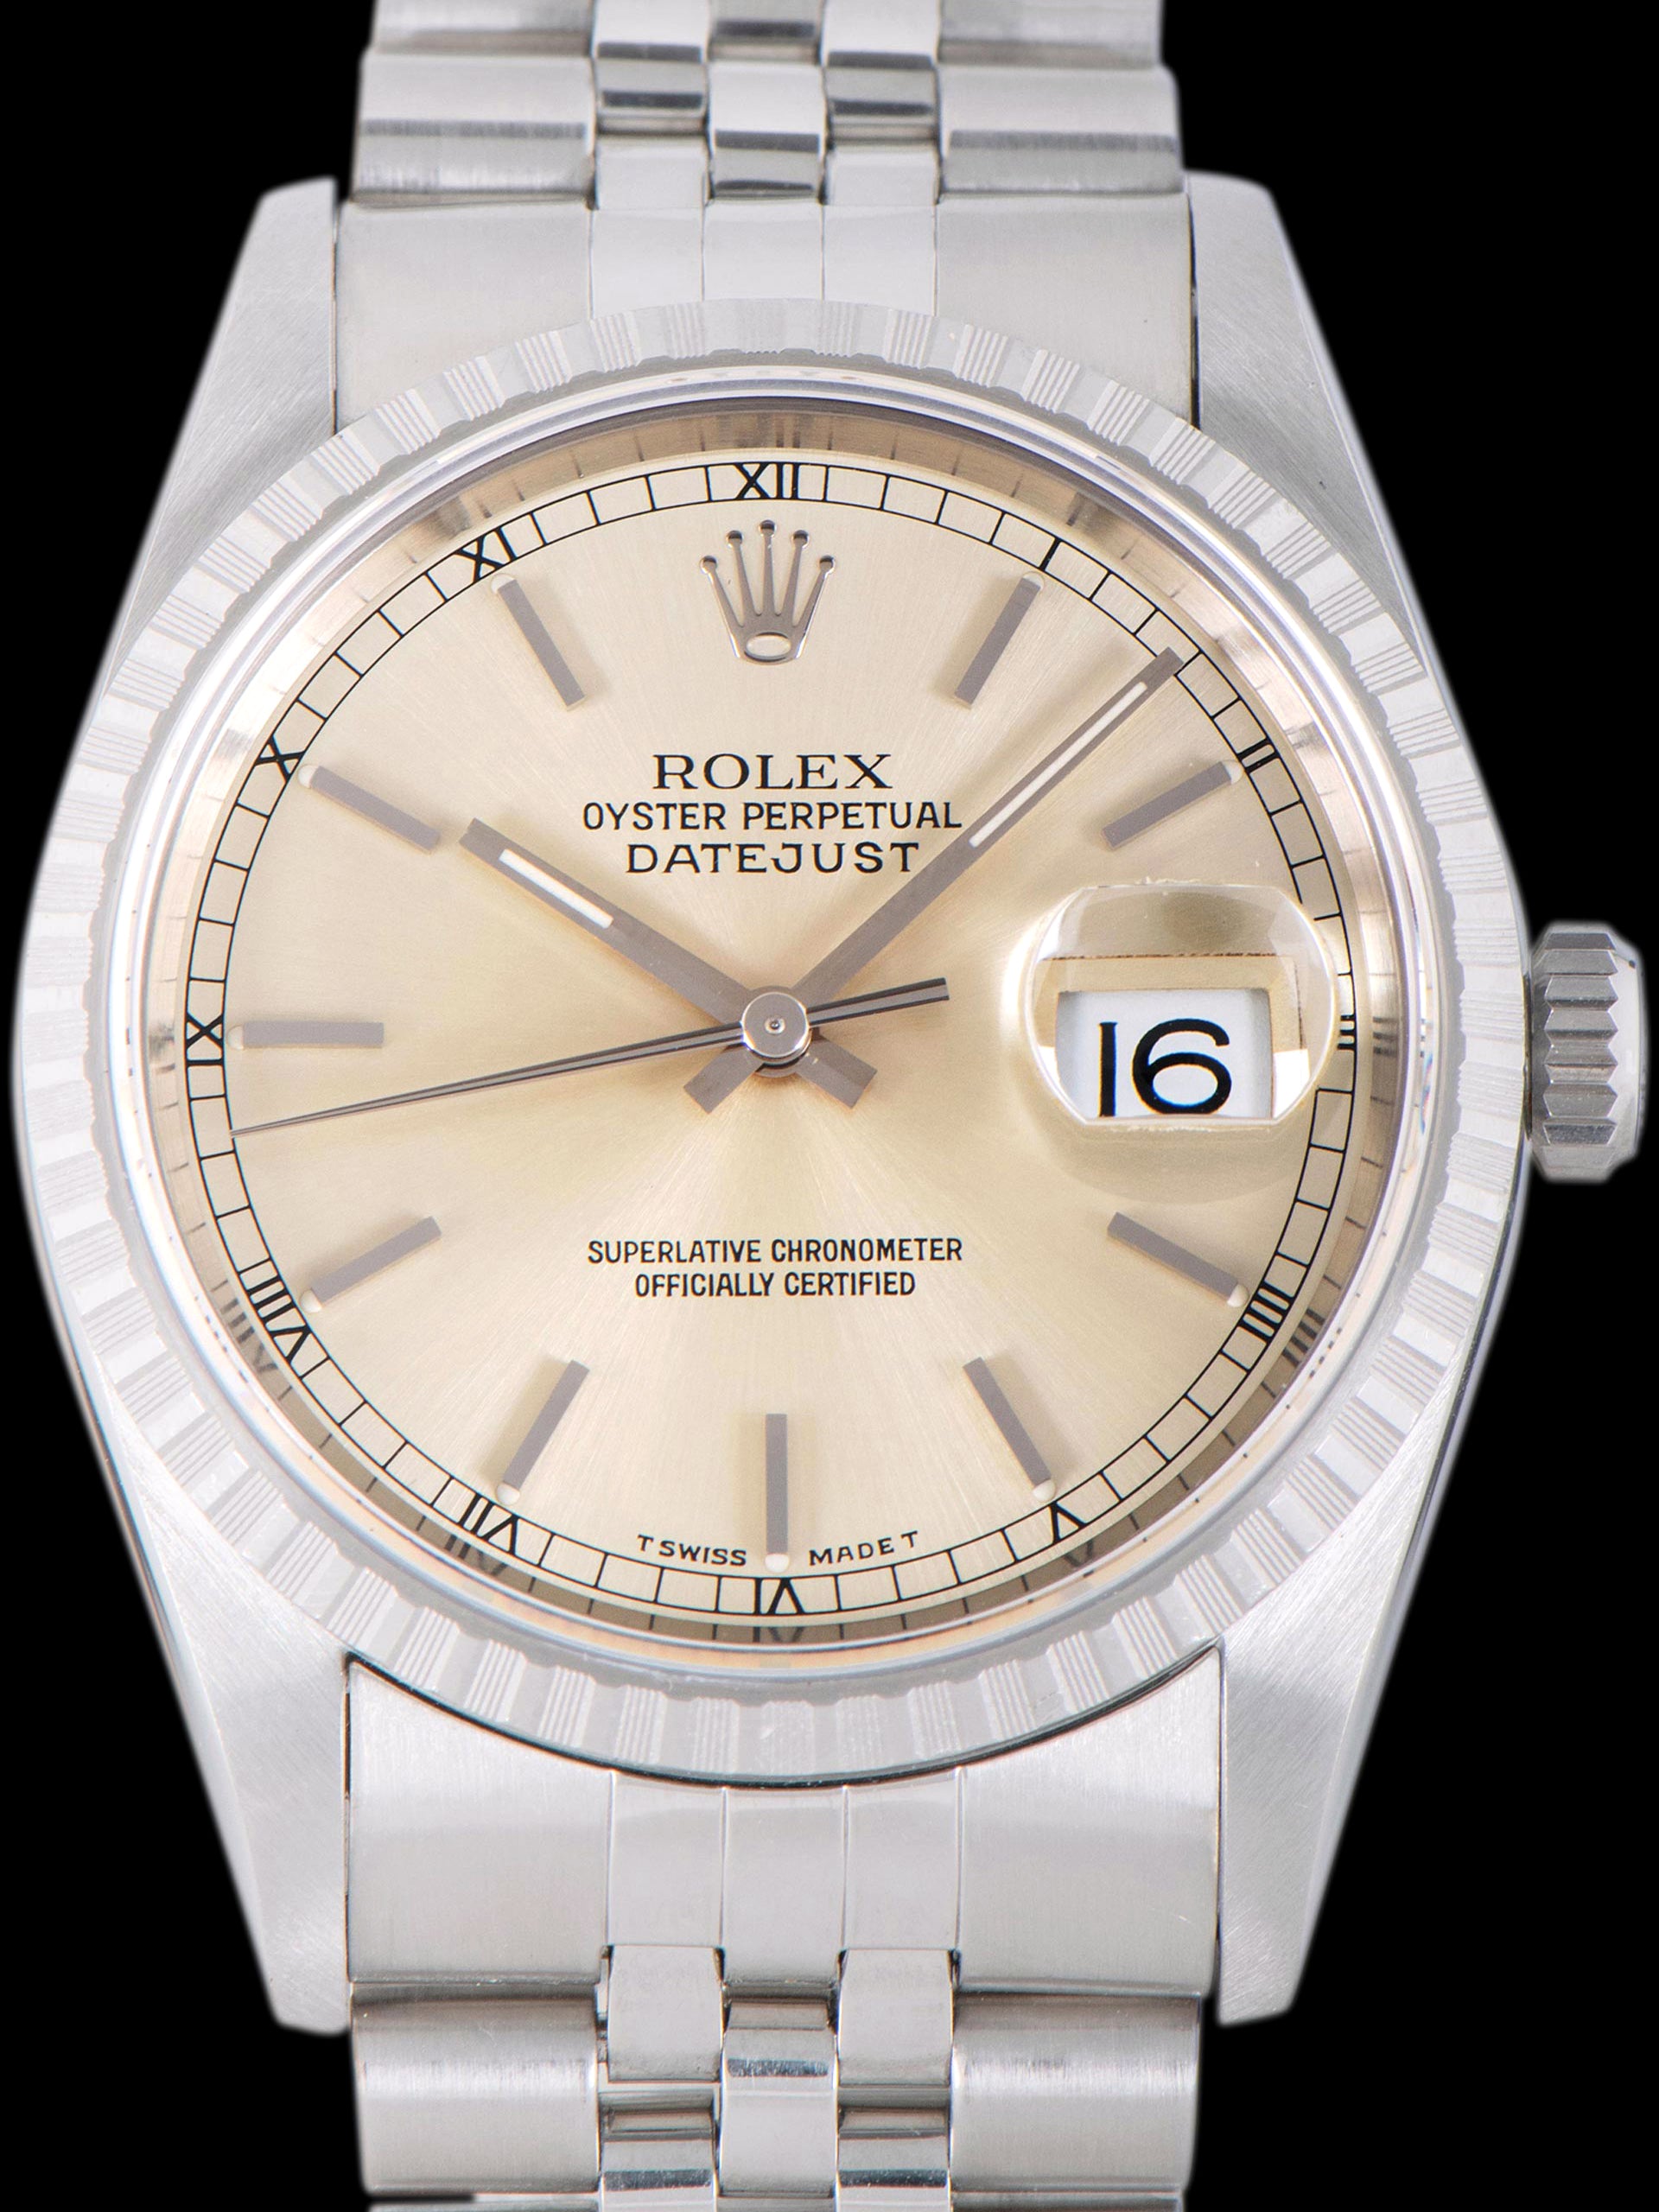 *Unpolished* 1994 Rolex Datejust (Ref. 16220) Silver Dial